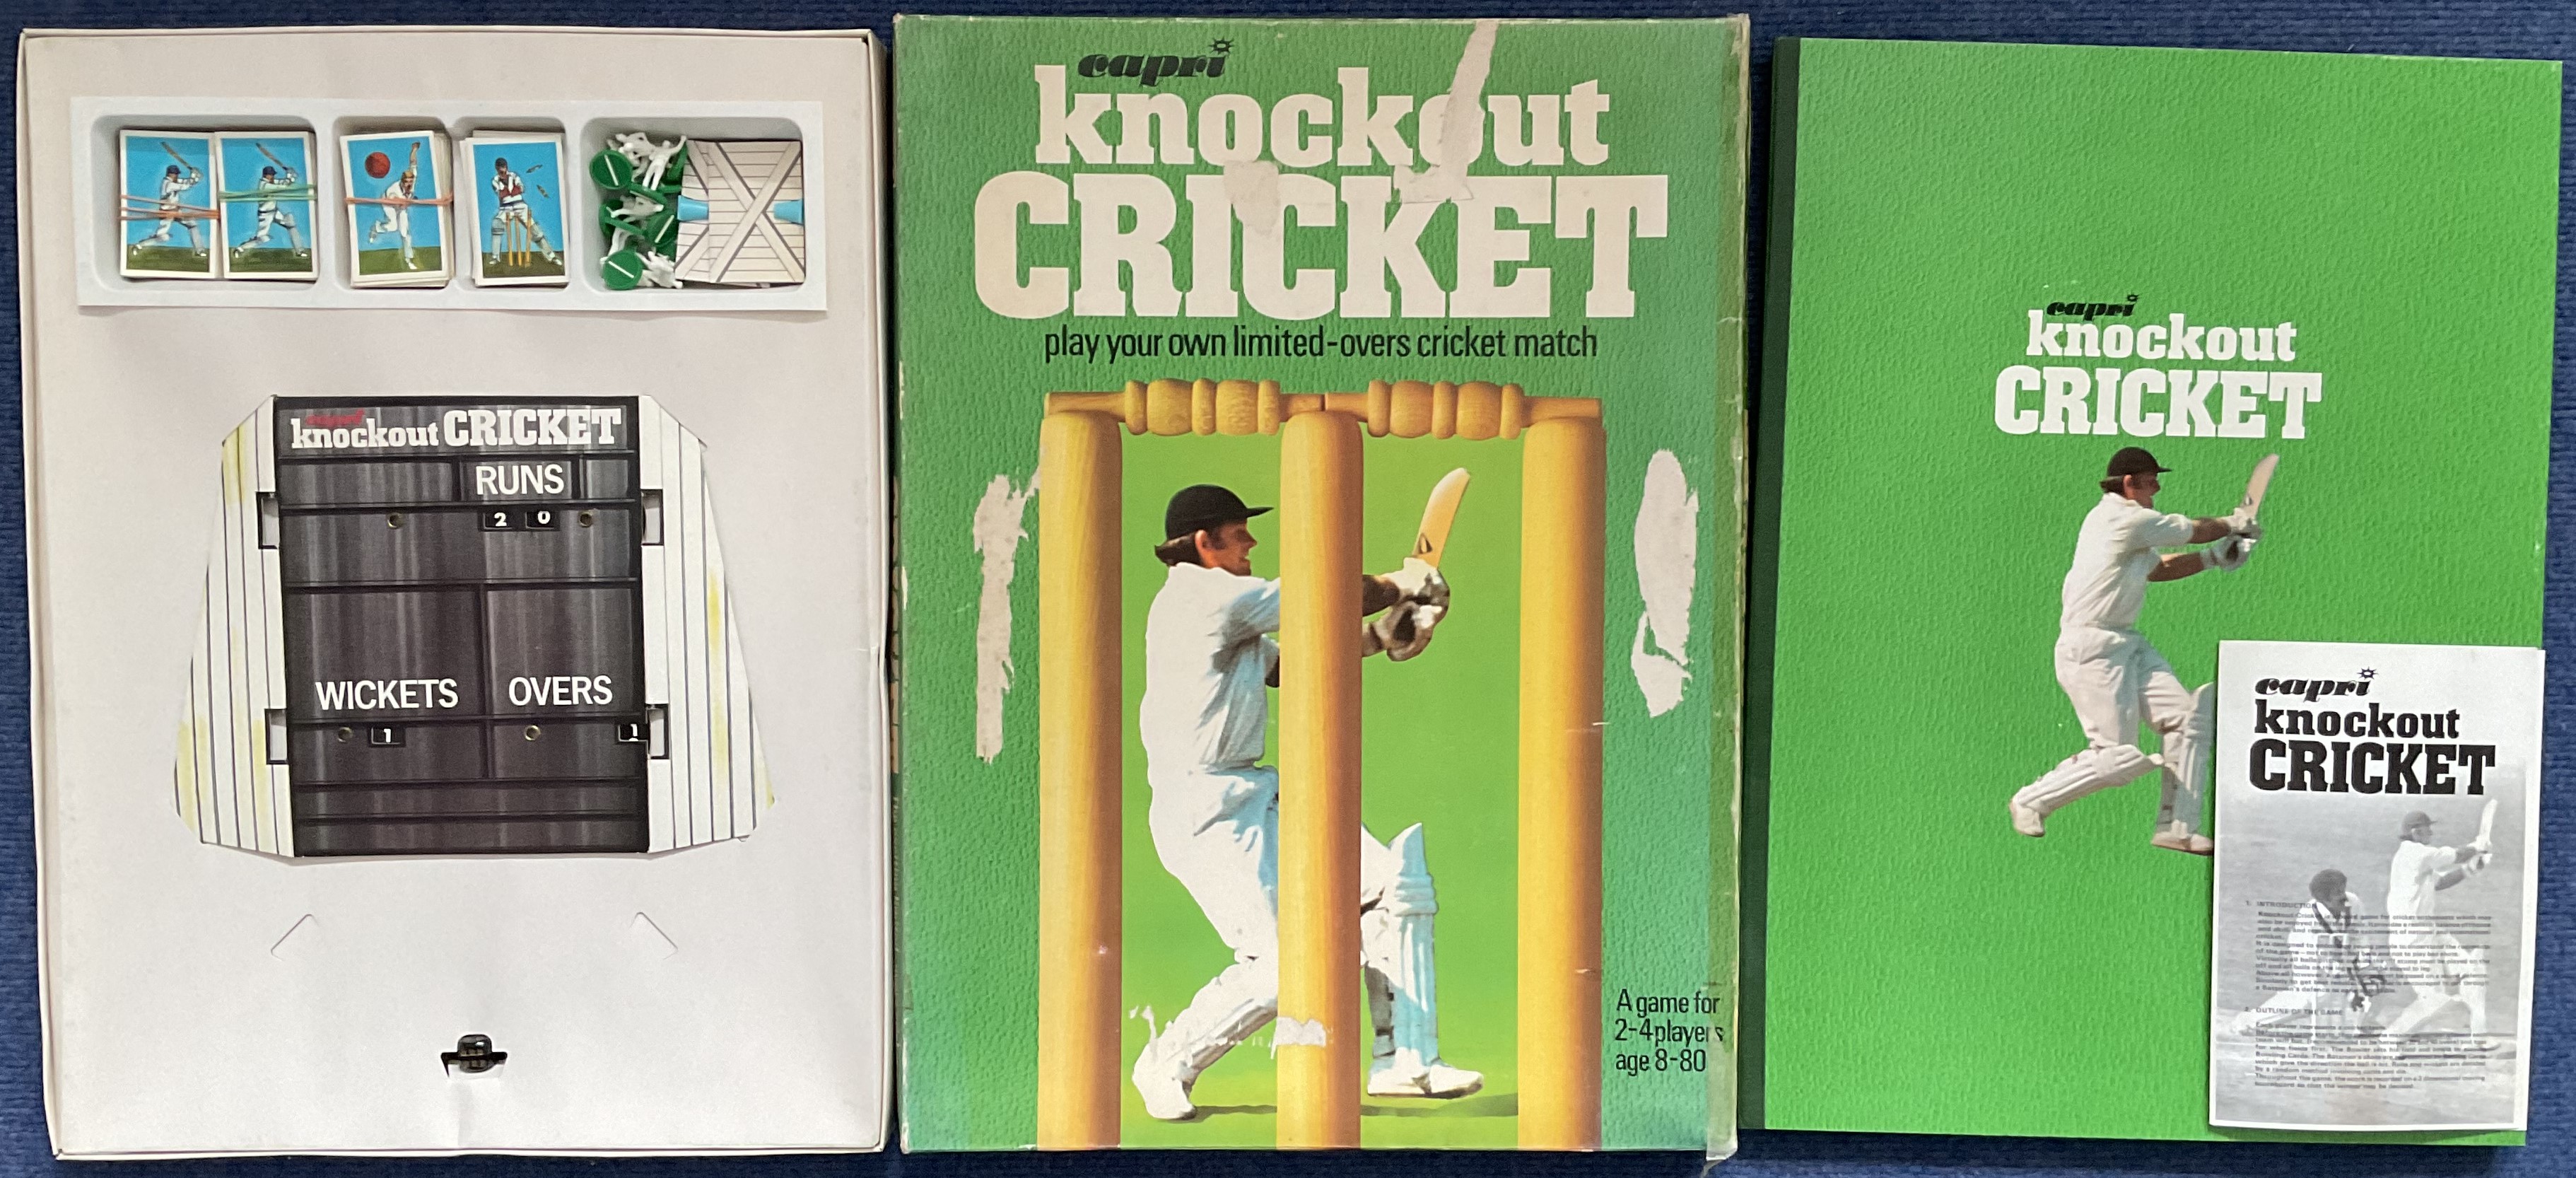 Knockout Cricket The Exciting Limited-Overs Cricket Game by Capri 1976 appears to be complete in its